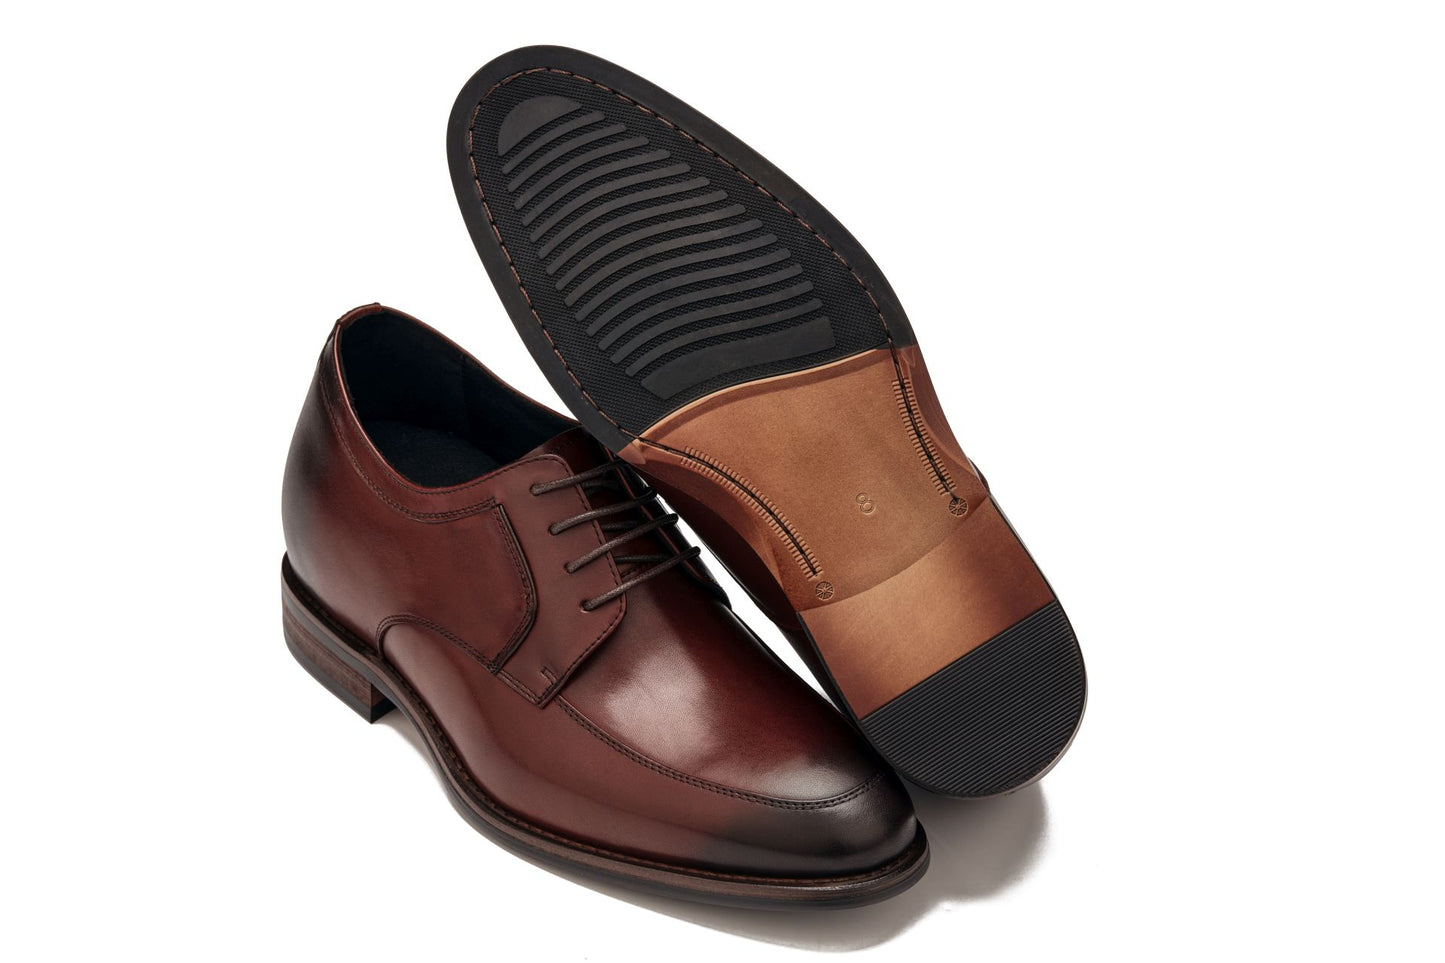 CALTO - Y7427 - 2.8 Inches Taller (Rust Brown) - Dress Oxford